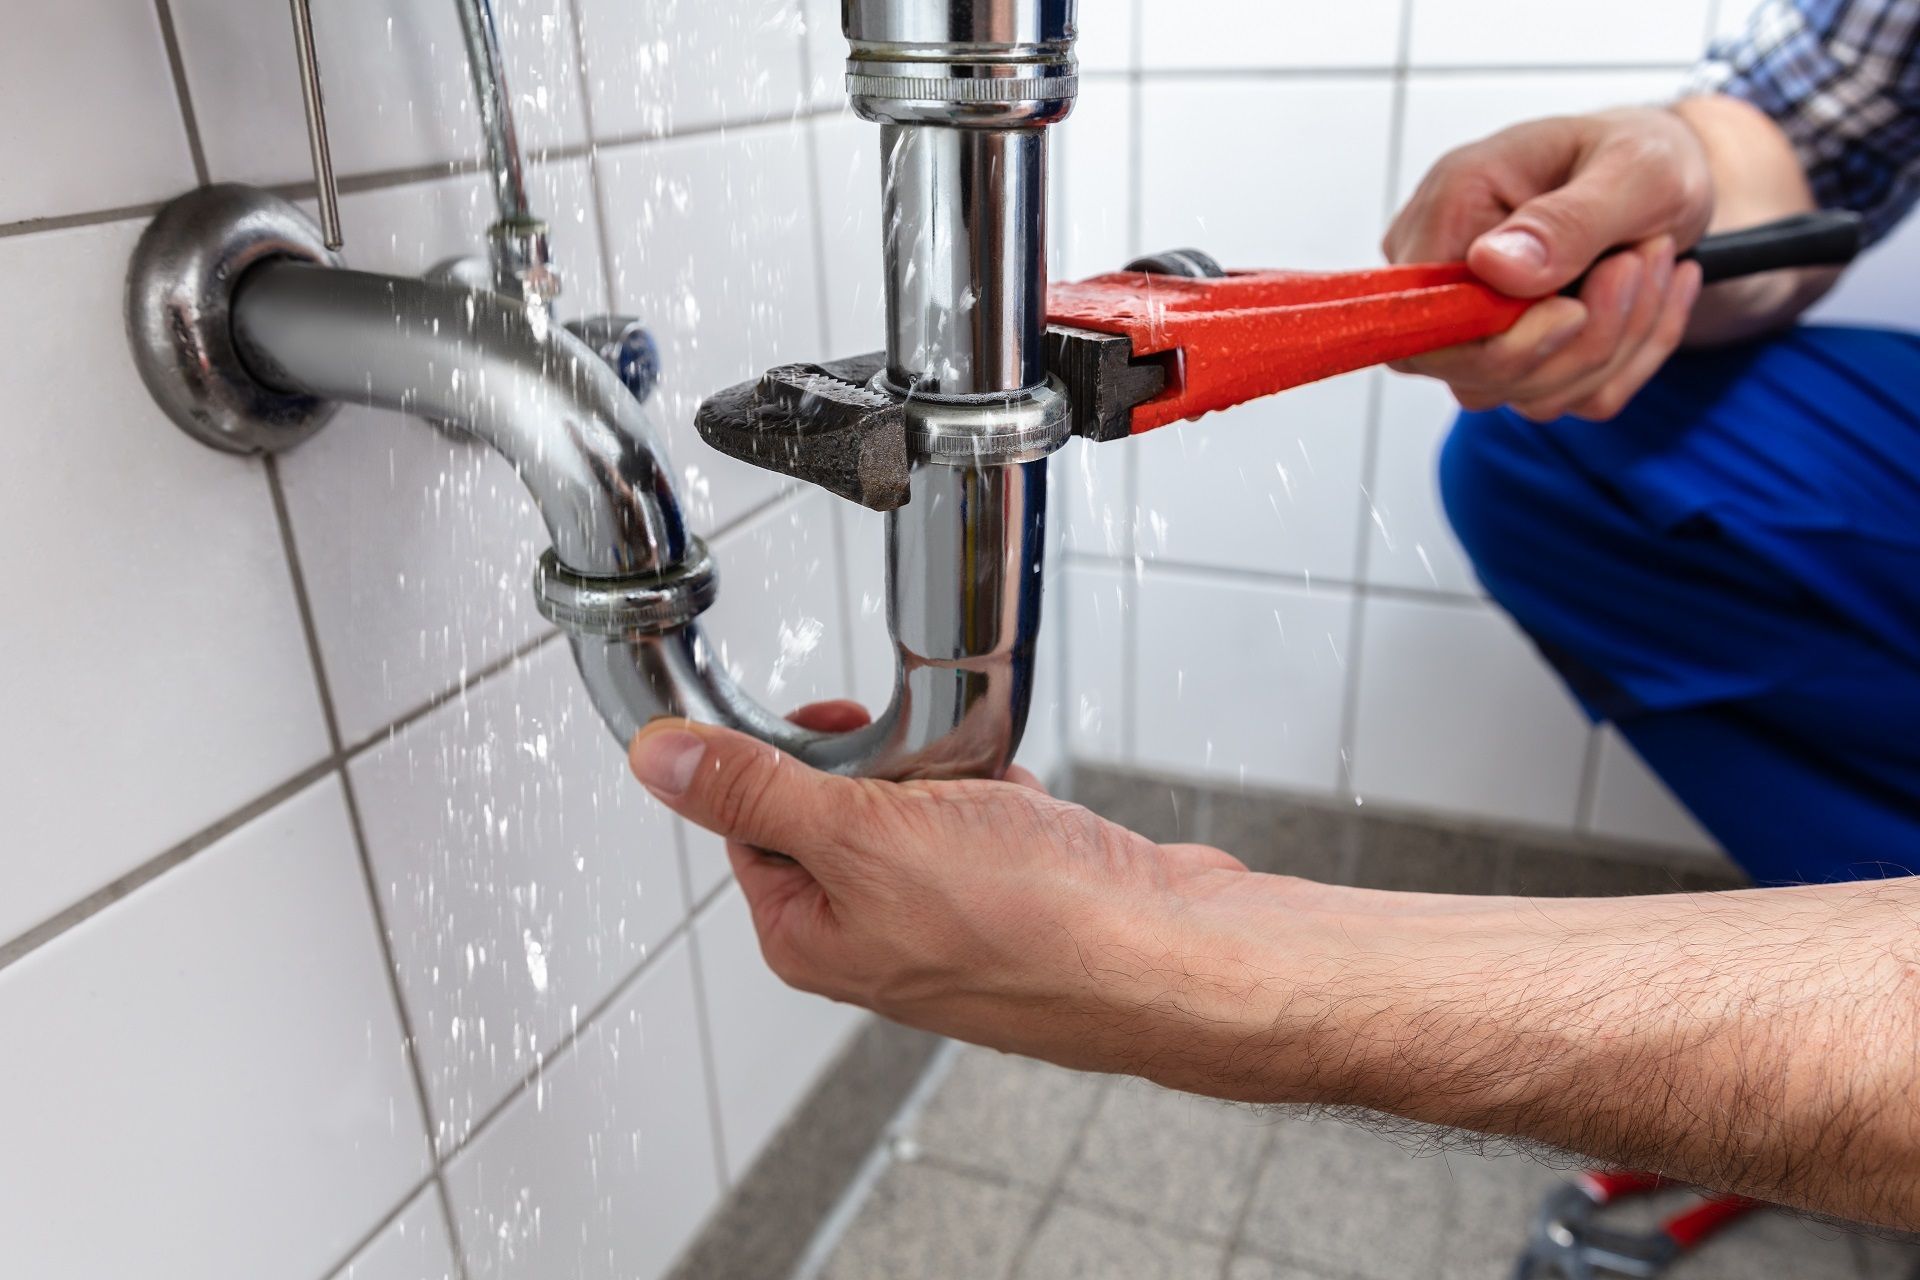 4 Crucial SEO Tips for Plumbers